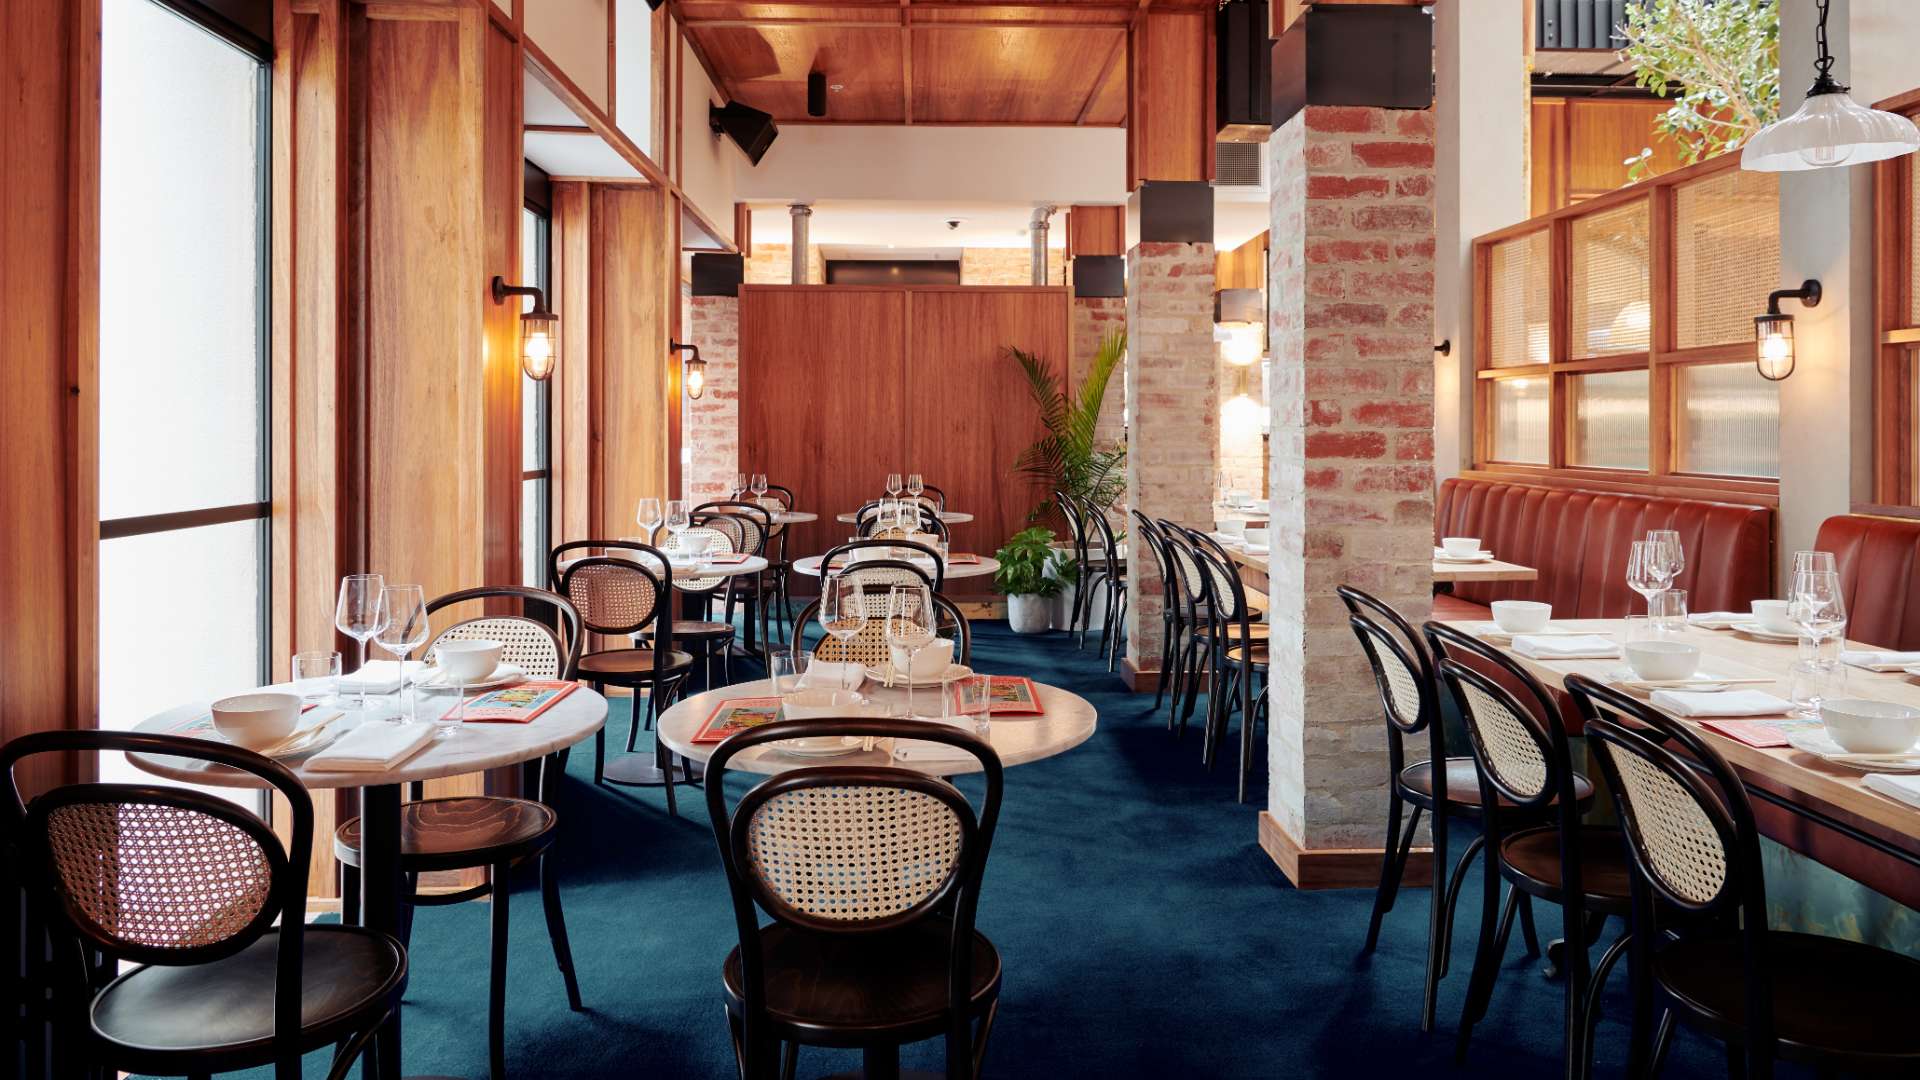 The Historic Albert Park Hotel Has Finally Reopened and Unveiled Its Ambitious Makeover